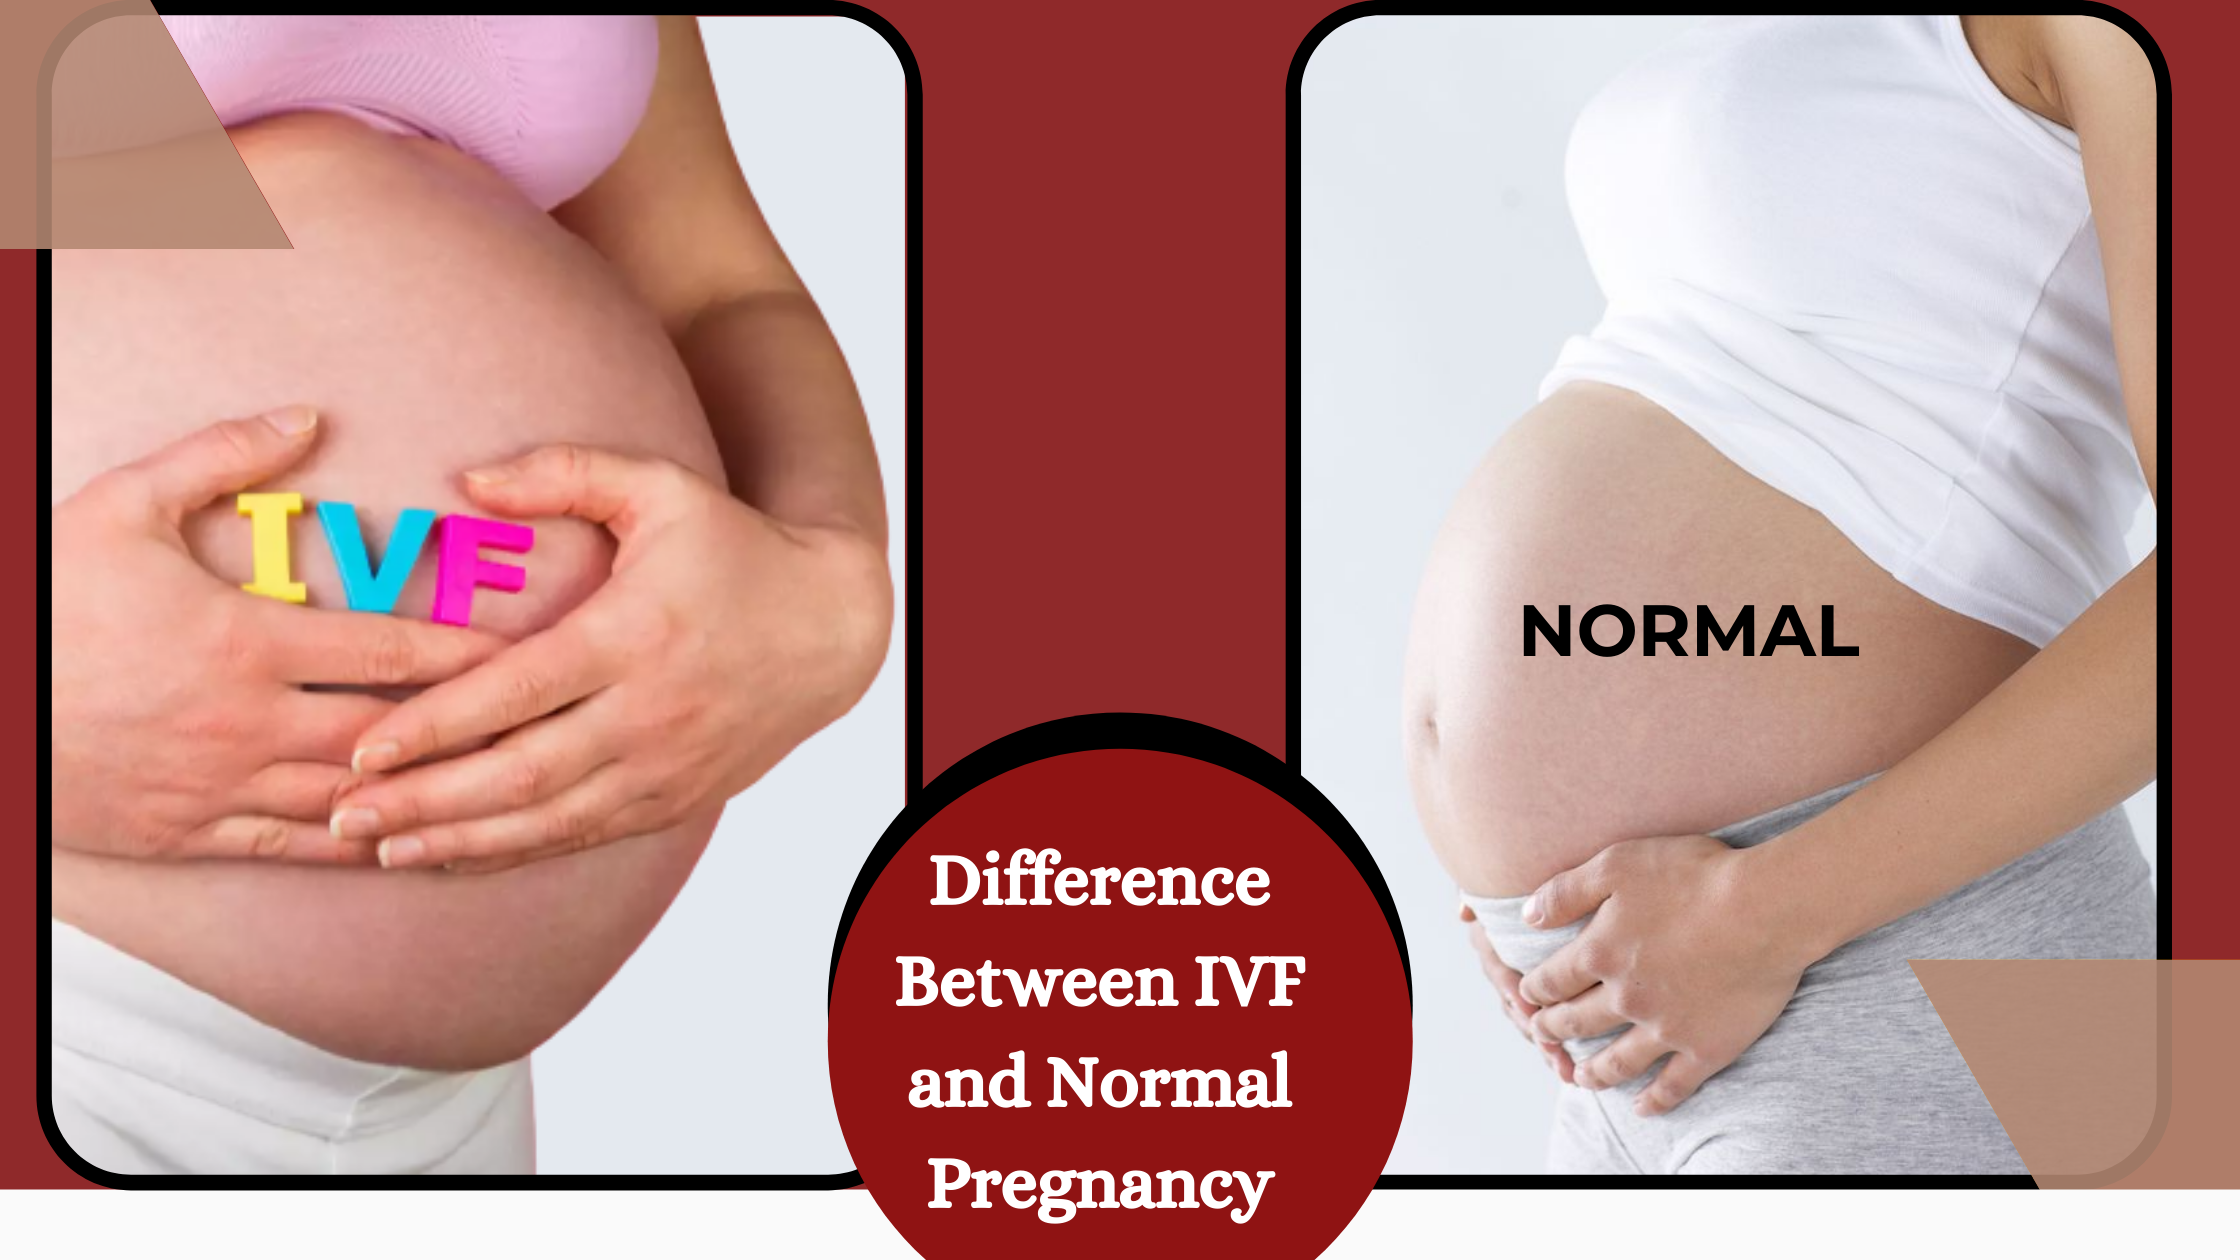 Difference Between IVF and Normal Pregnancy